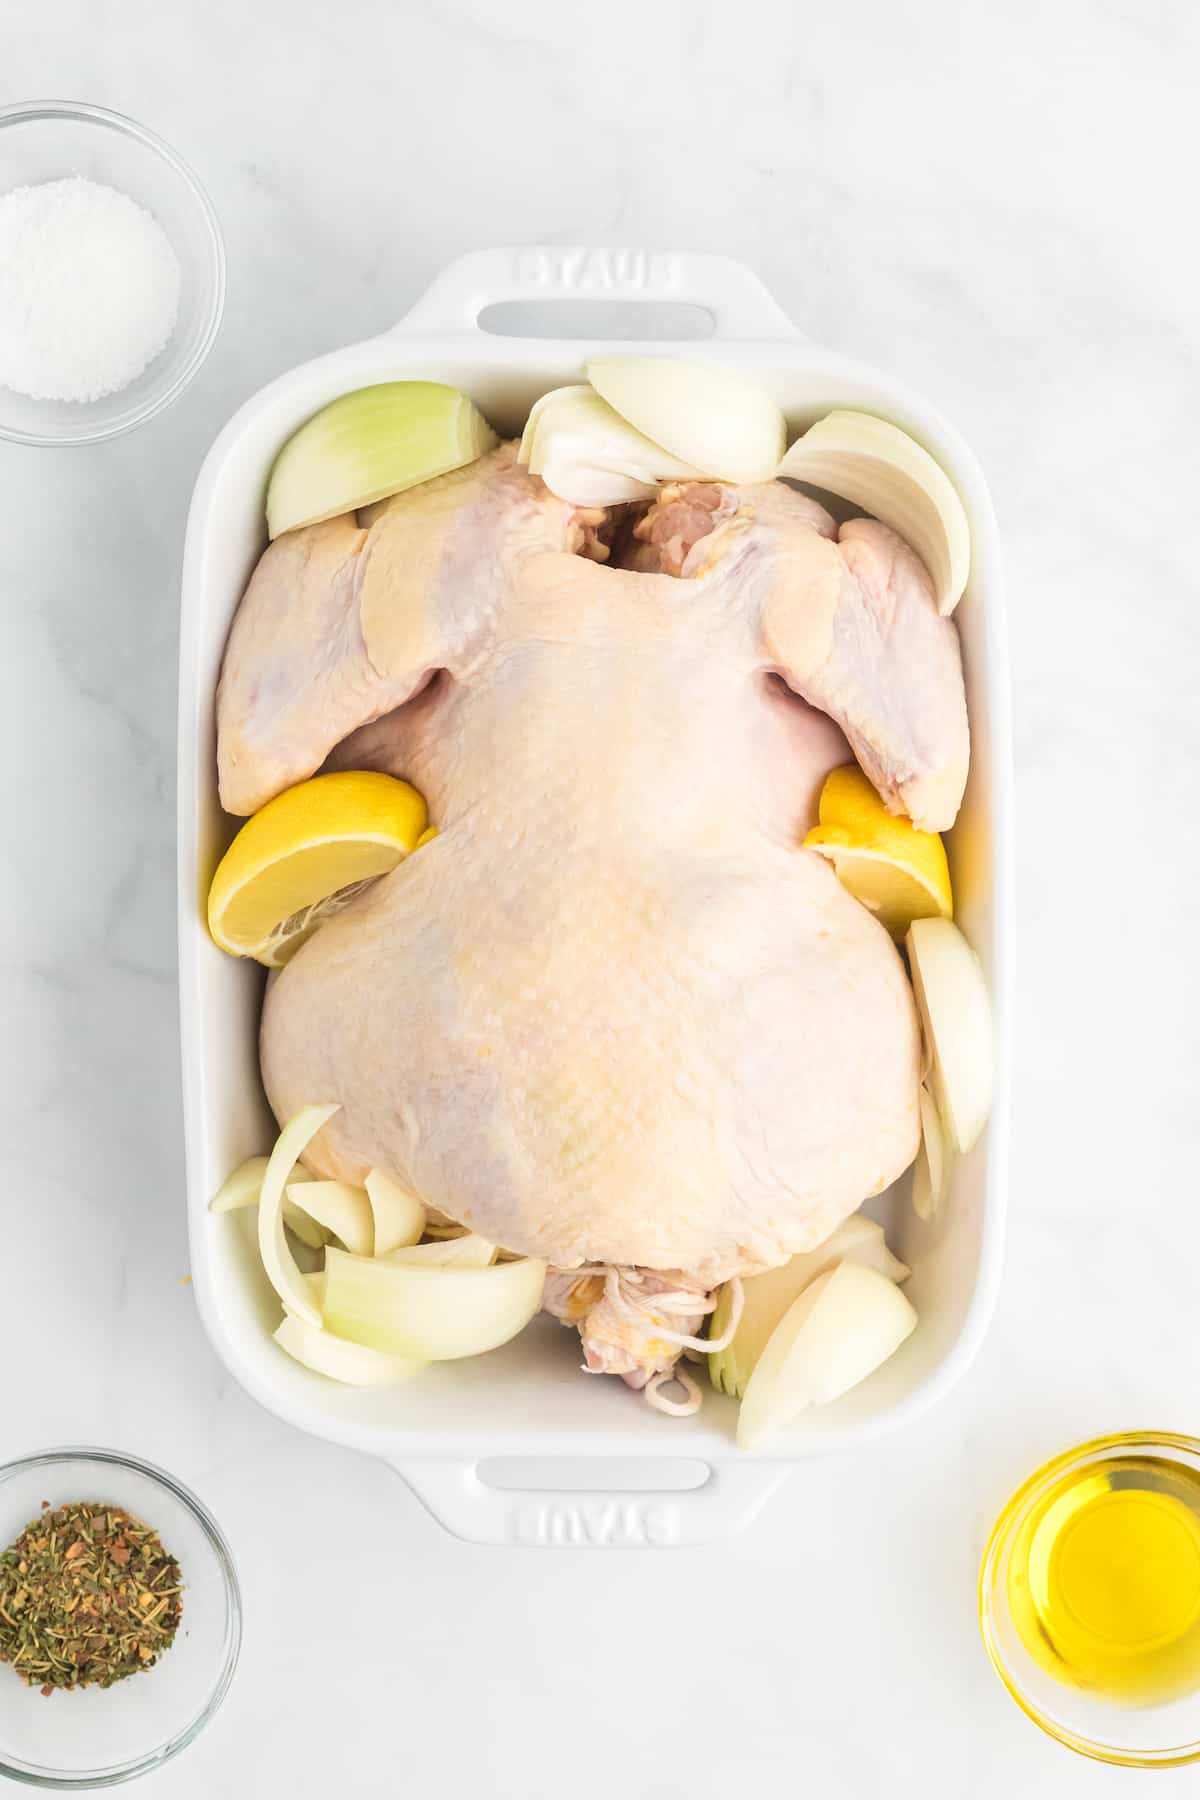 lemon wedges and onion quarters spread around the whole chicken in a white baking dish